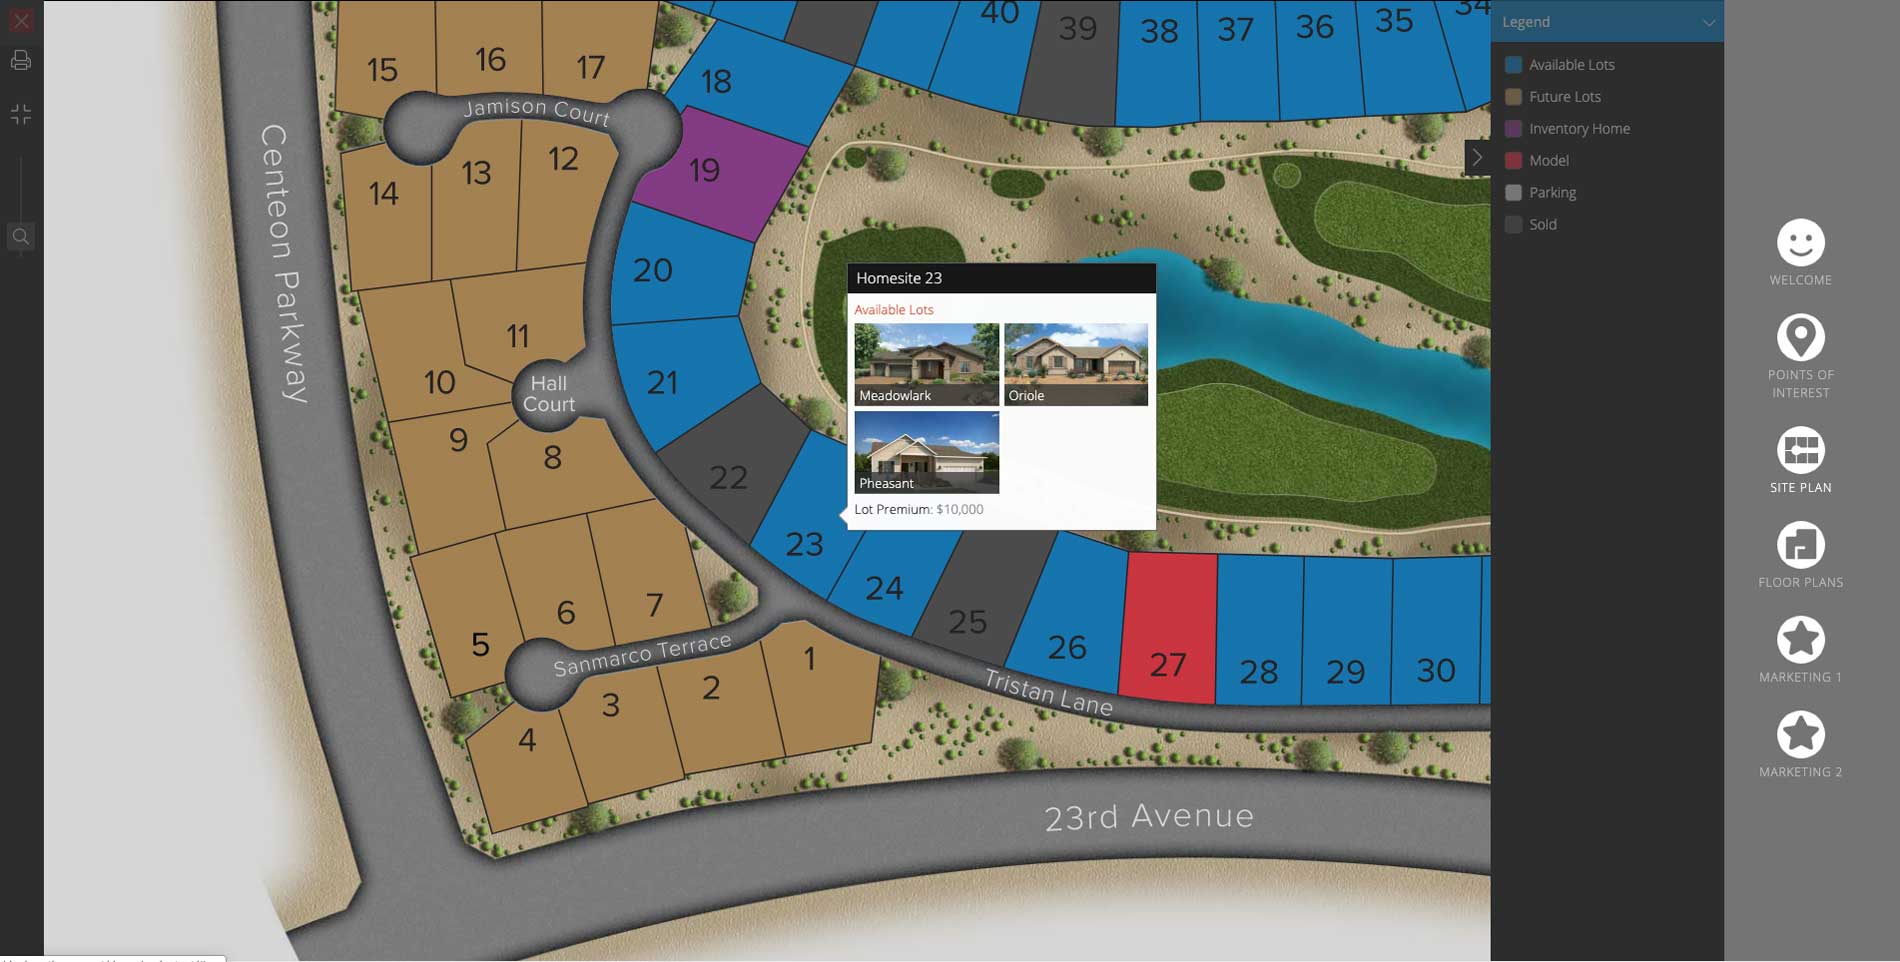 See homesite specific floor plan availability